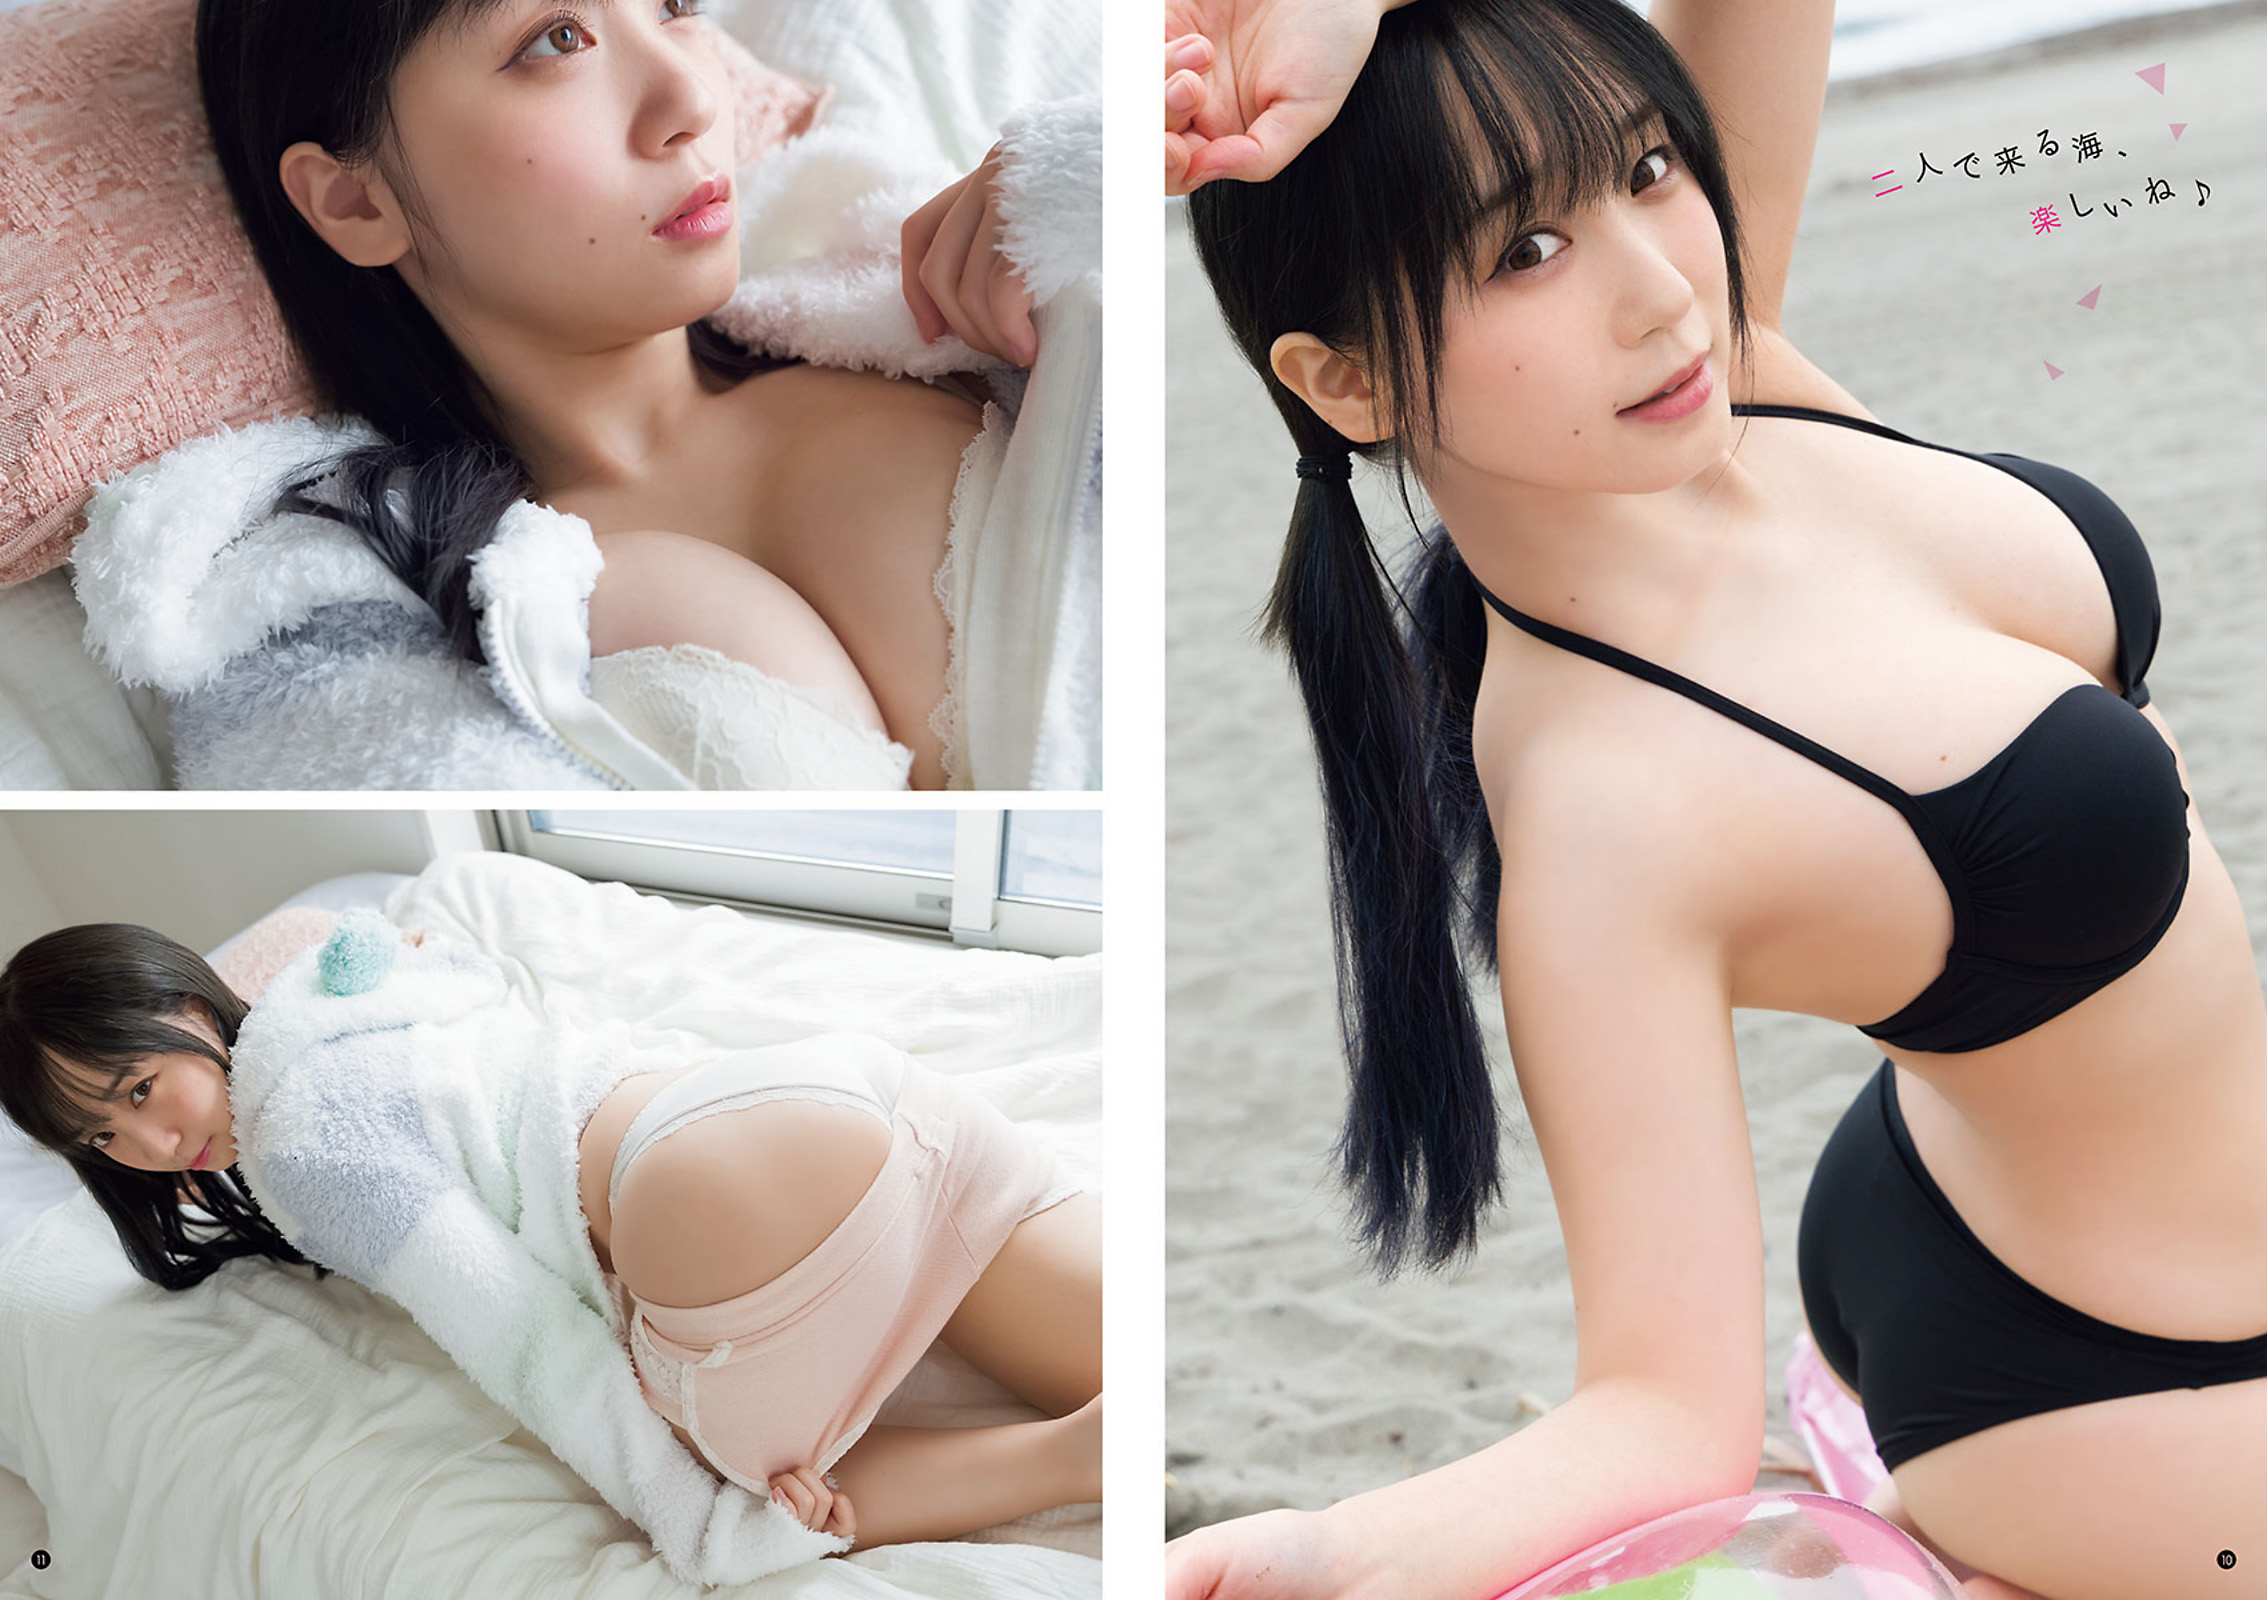 This is the sample picture from Moe Iori｜伊織もえ - Yuko Tsubakino post. Click here to see image full size.